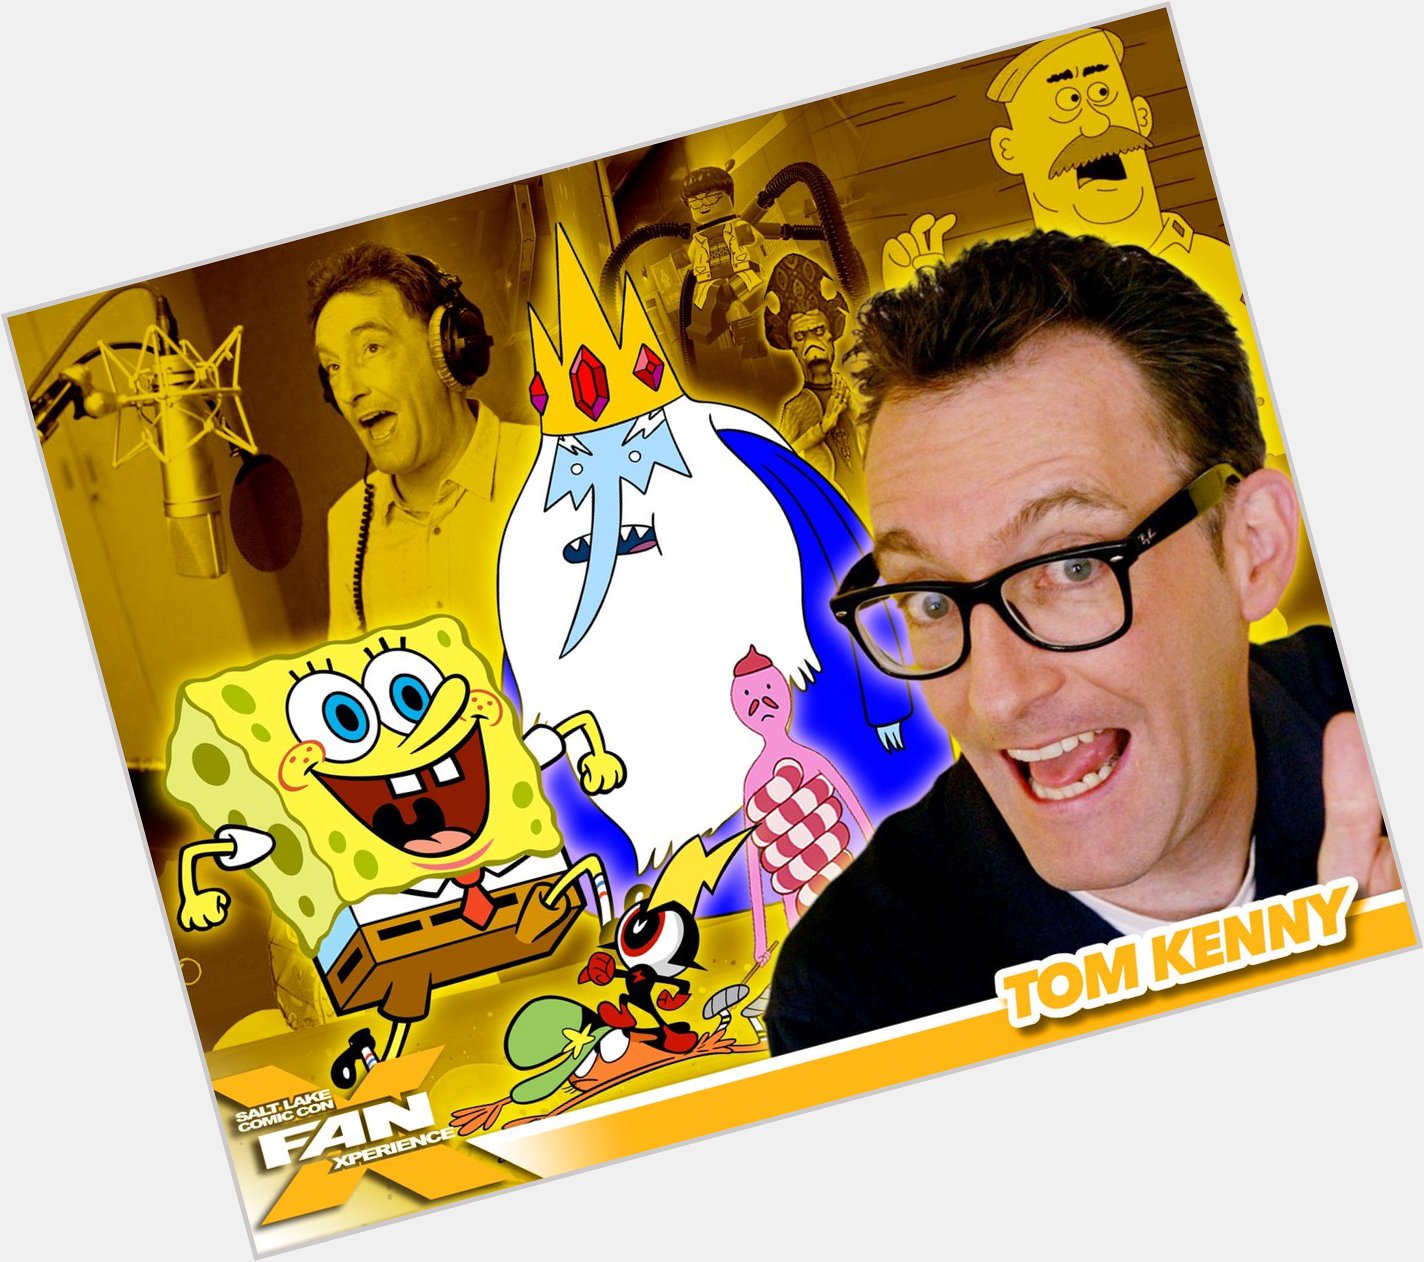    Happy birthday to the awesome Tom Kenny! The man of many voices! 